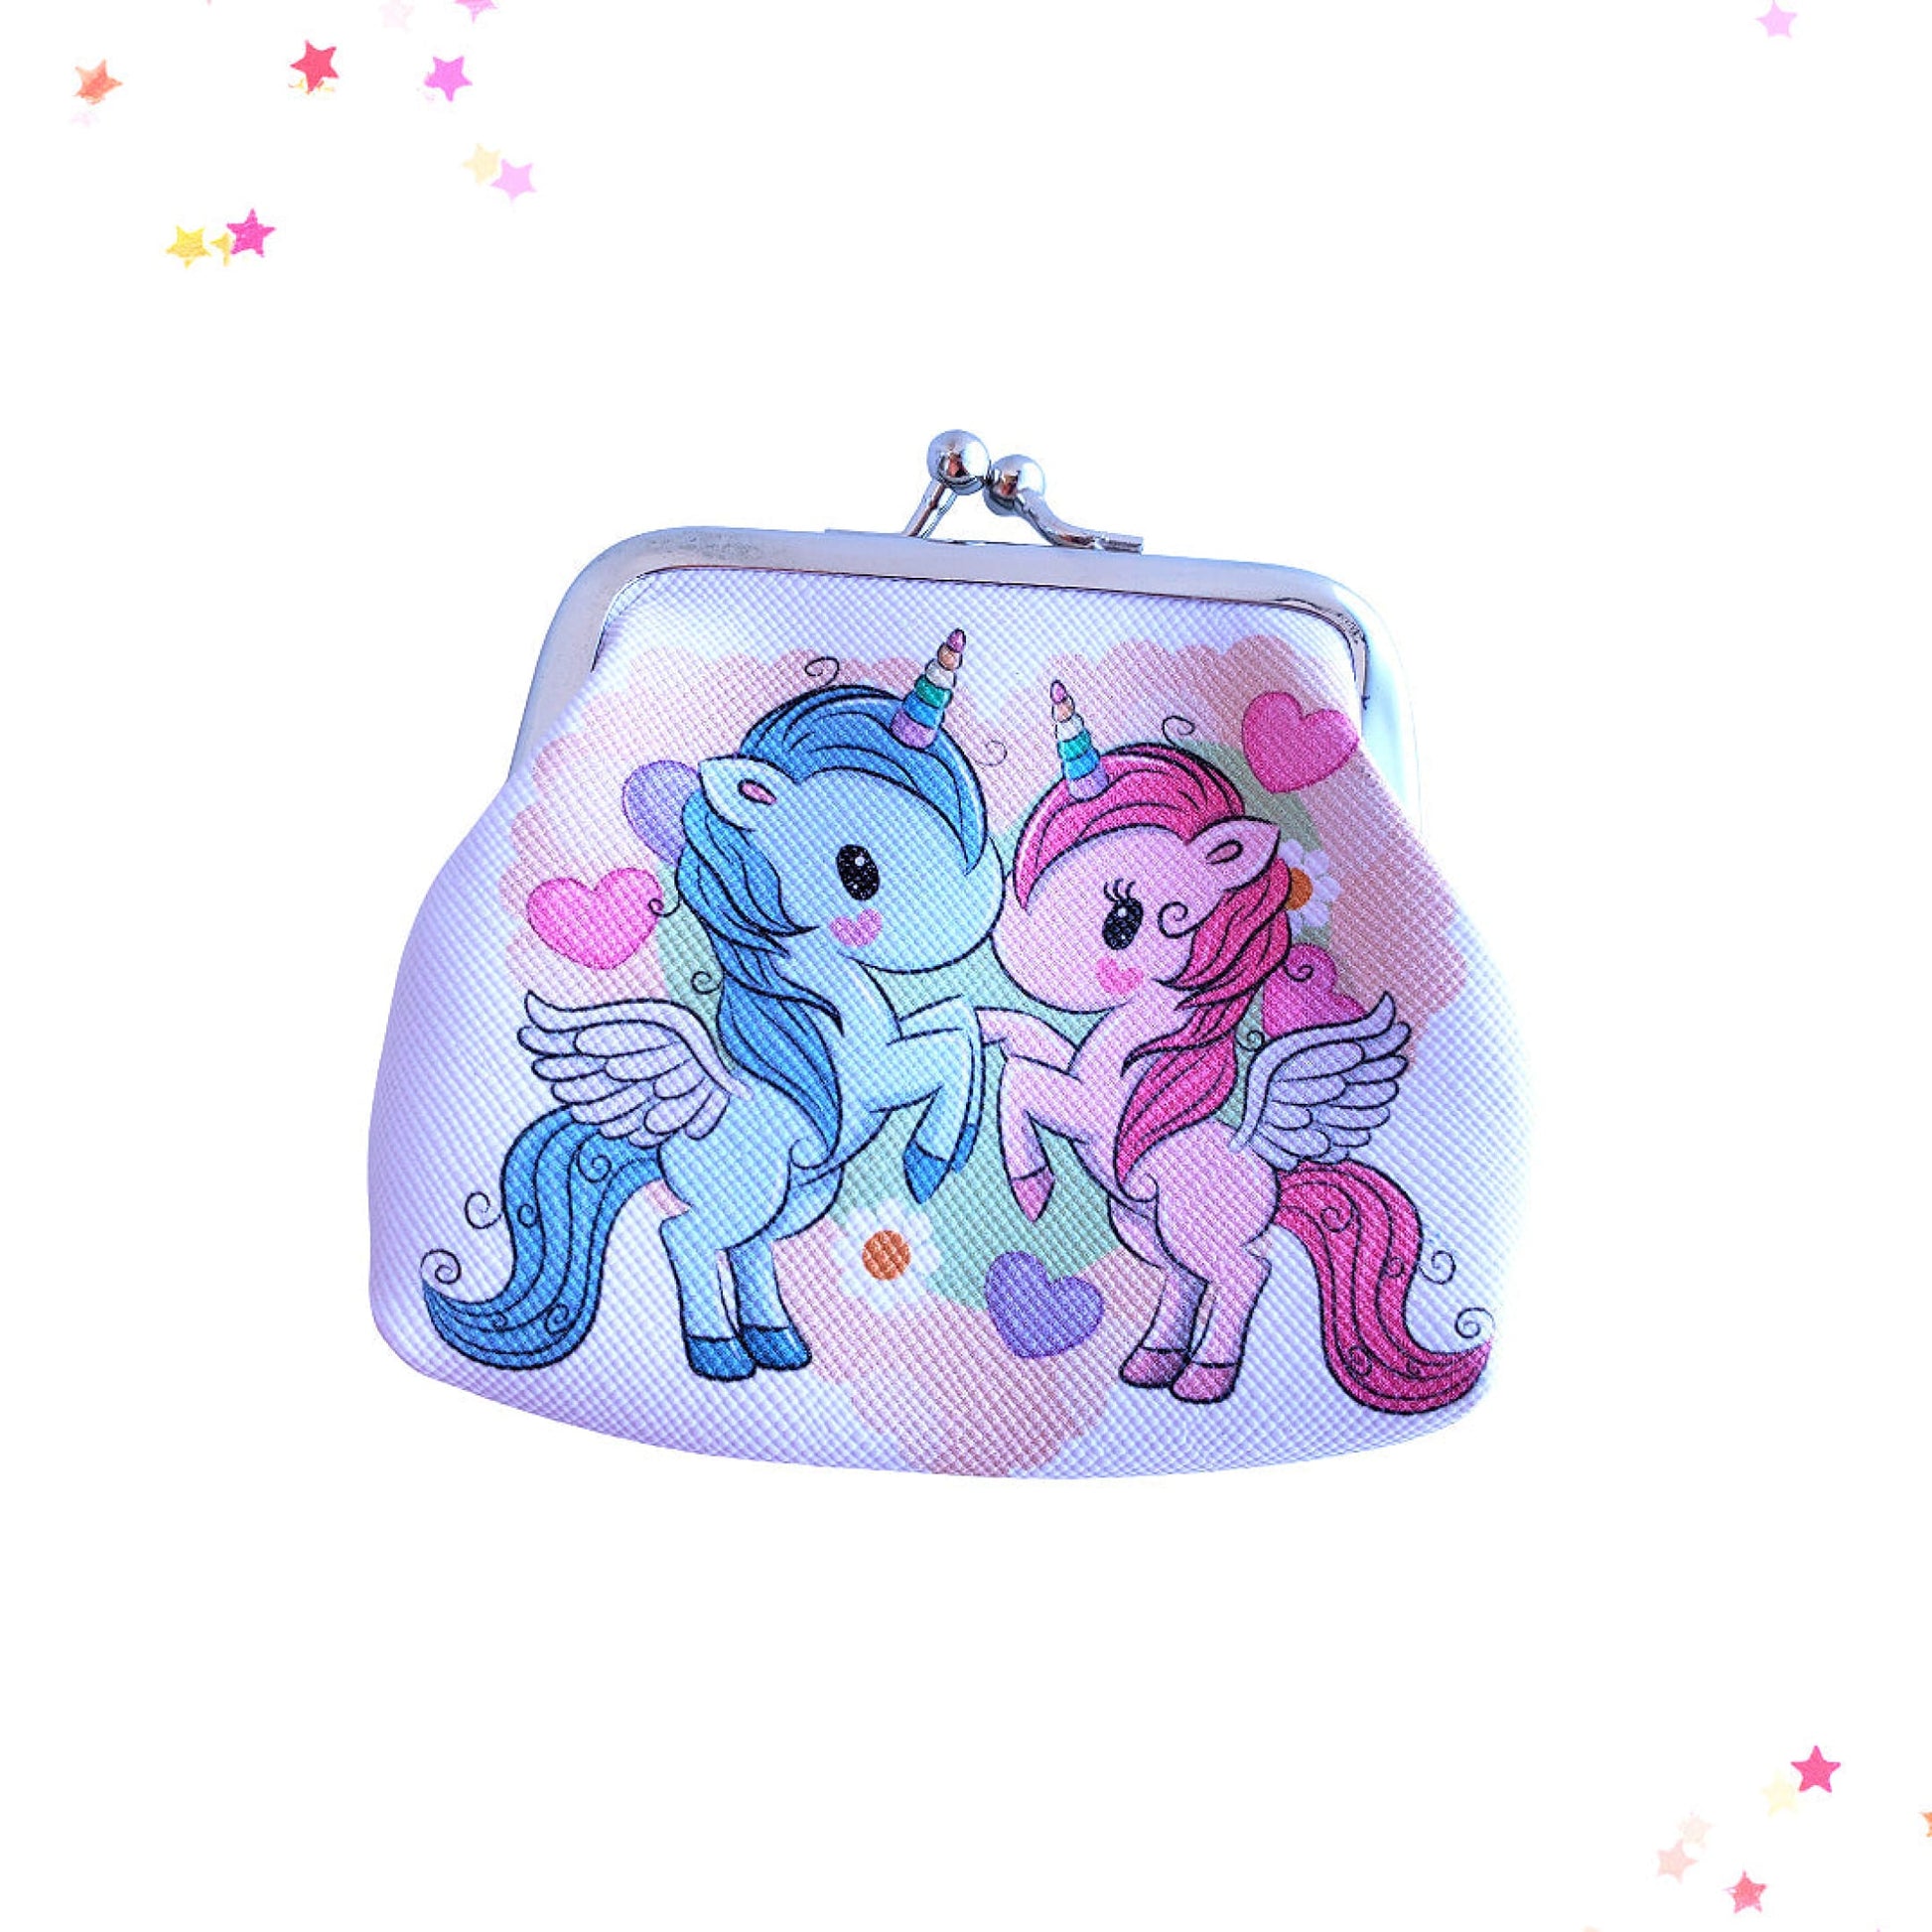 Easy-Open Unicorn Coin Purse in Love Struck from Confetti Kitty, Only 4.99